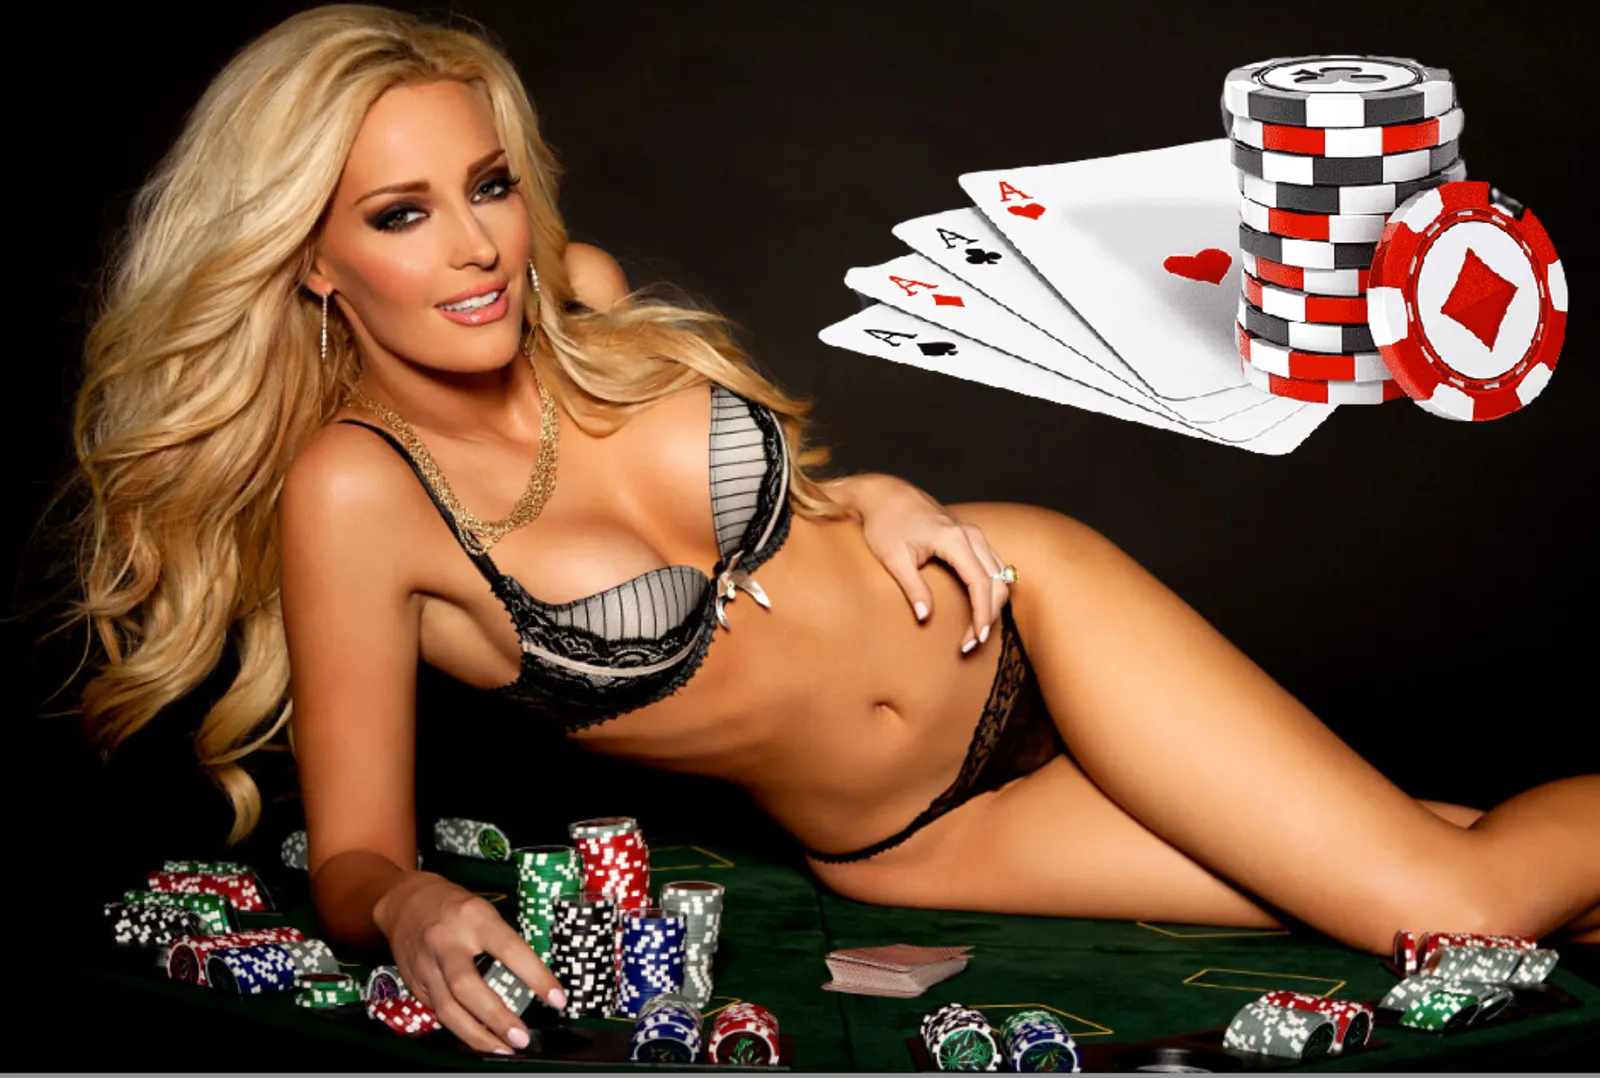 5 Key Features Every Poker Game Must Include in Their Game